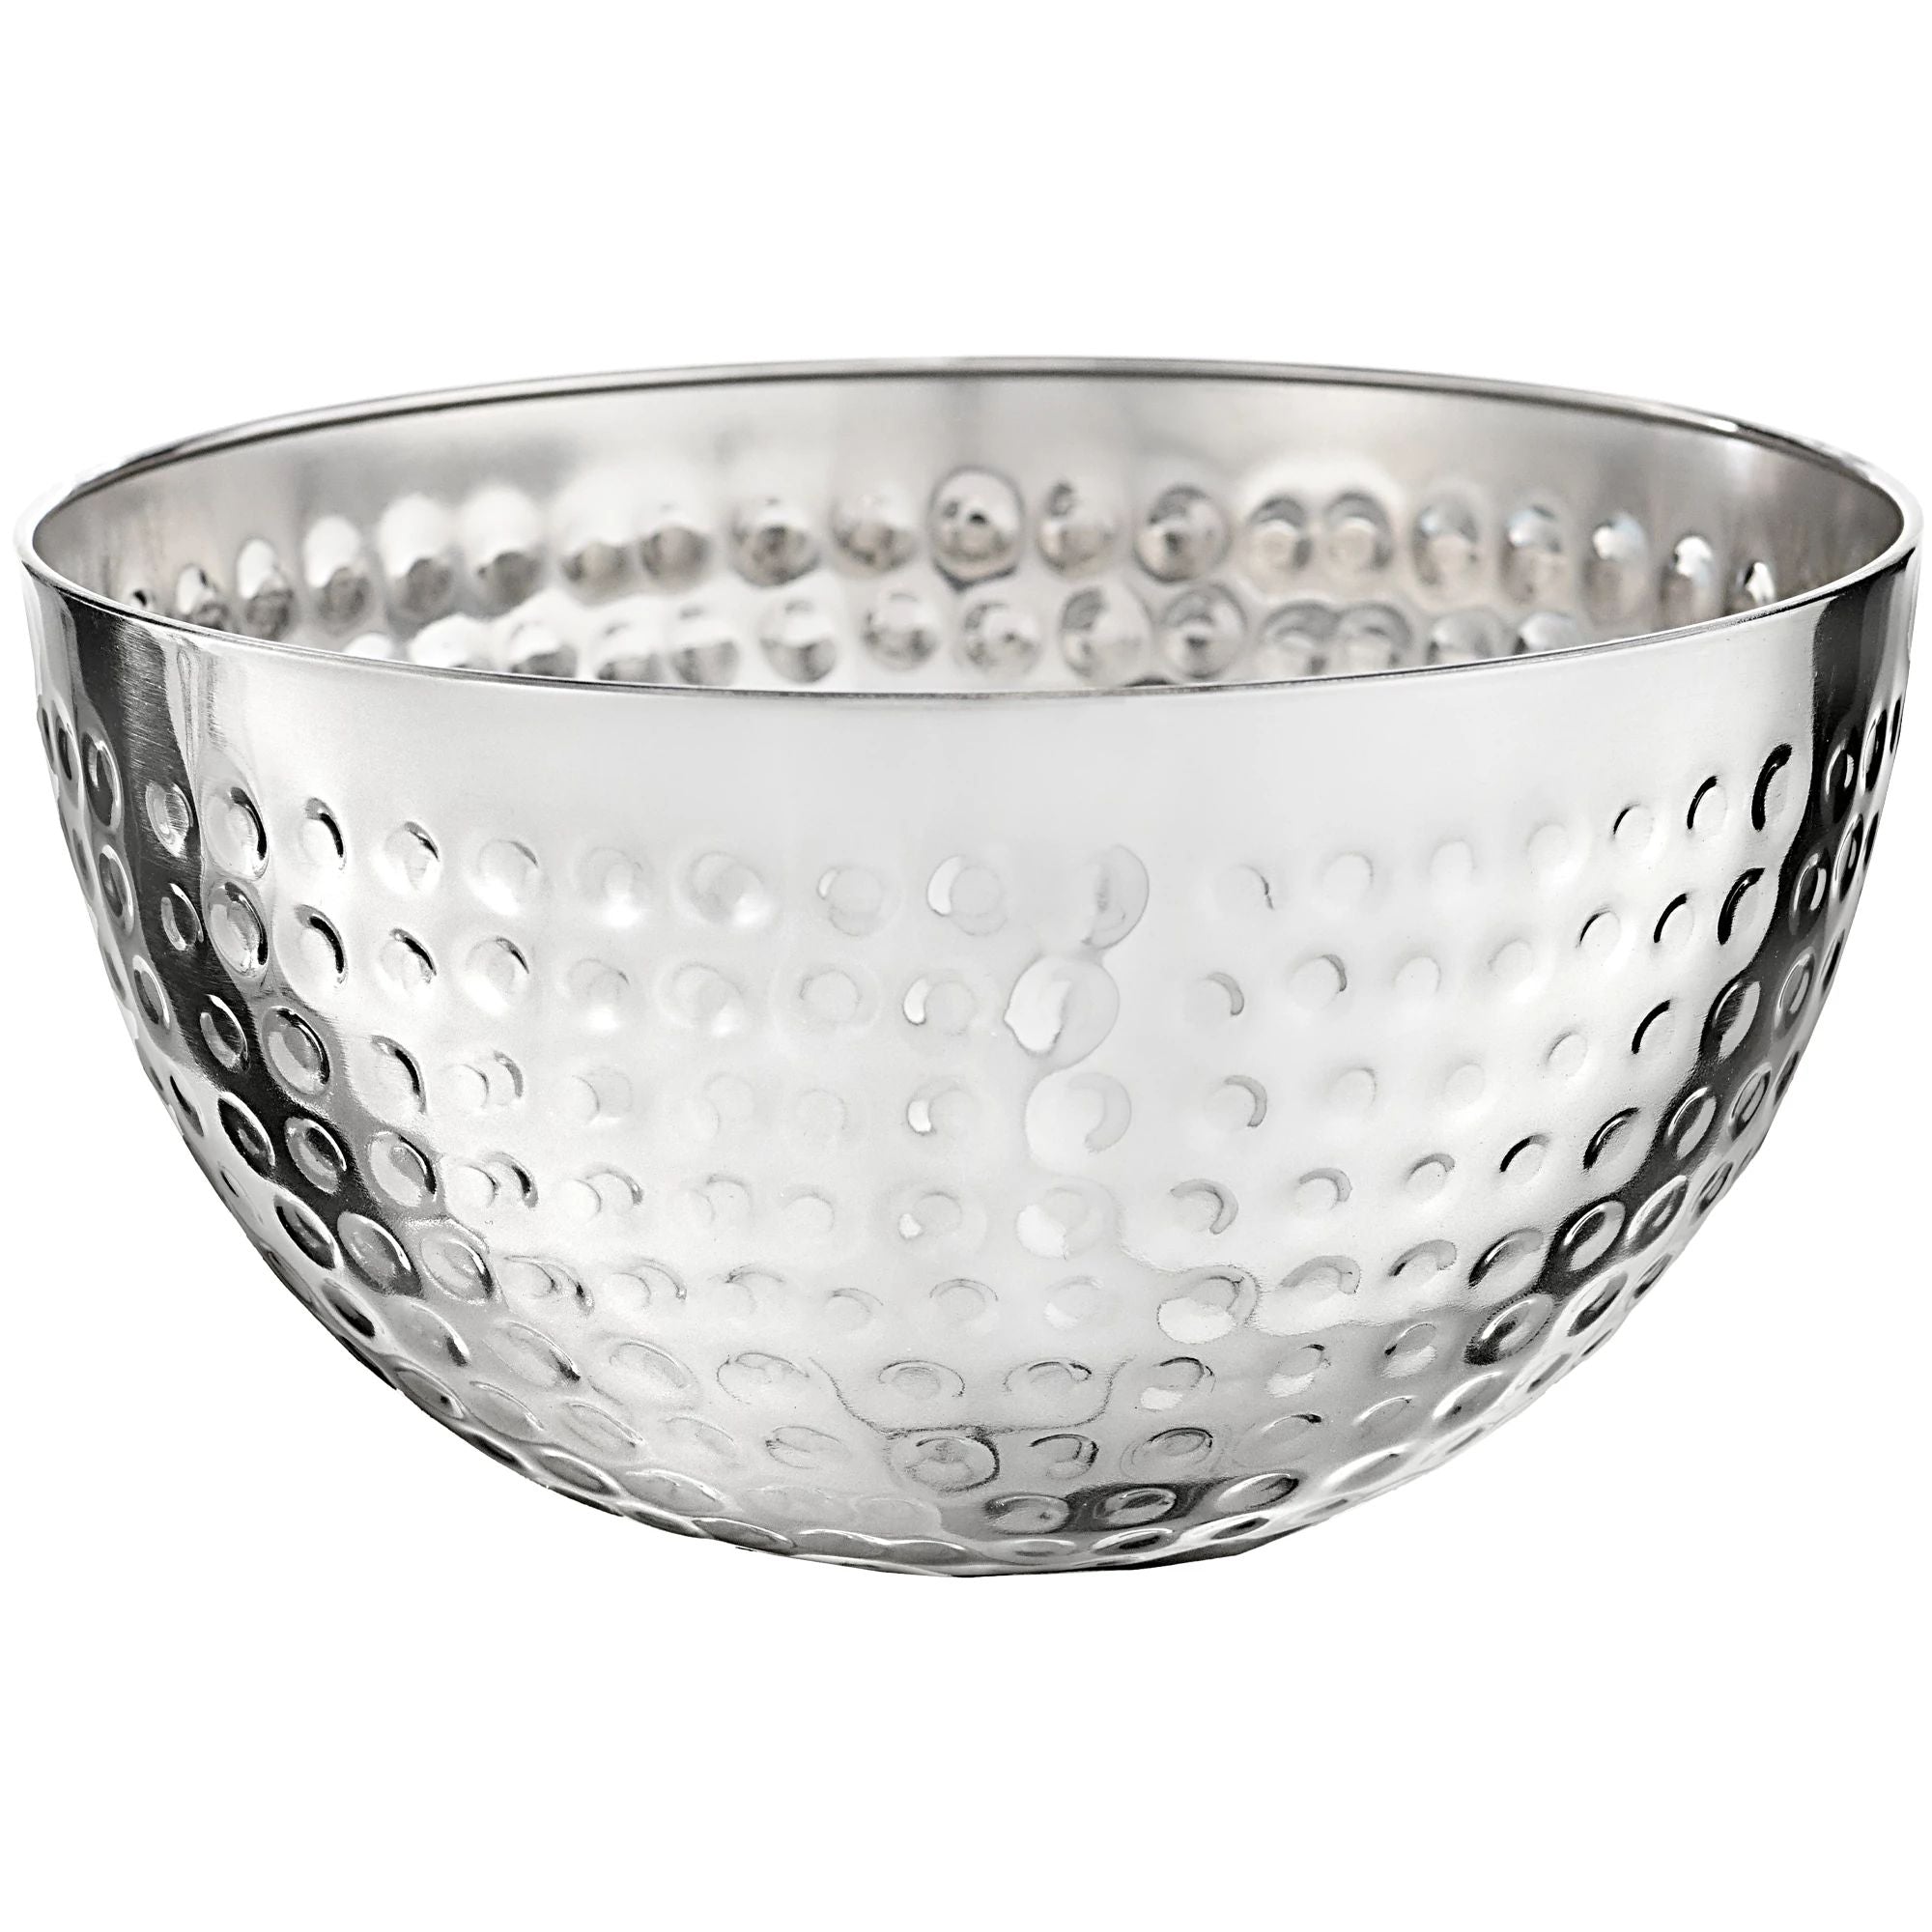 Large Hammered Stainless Steel Bowl